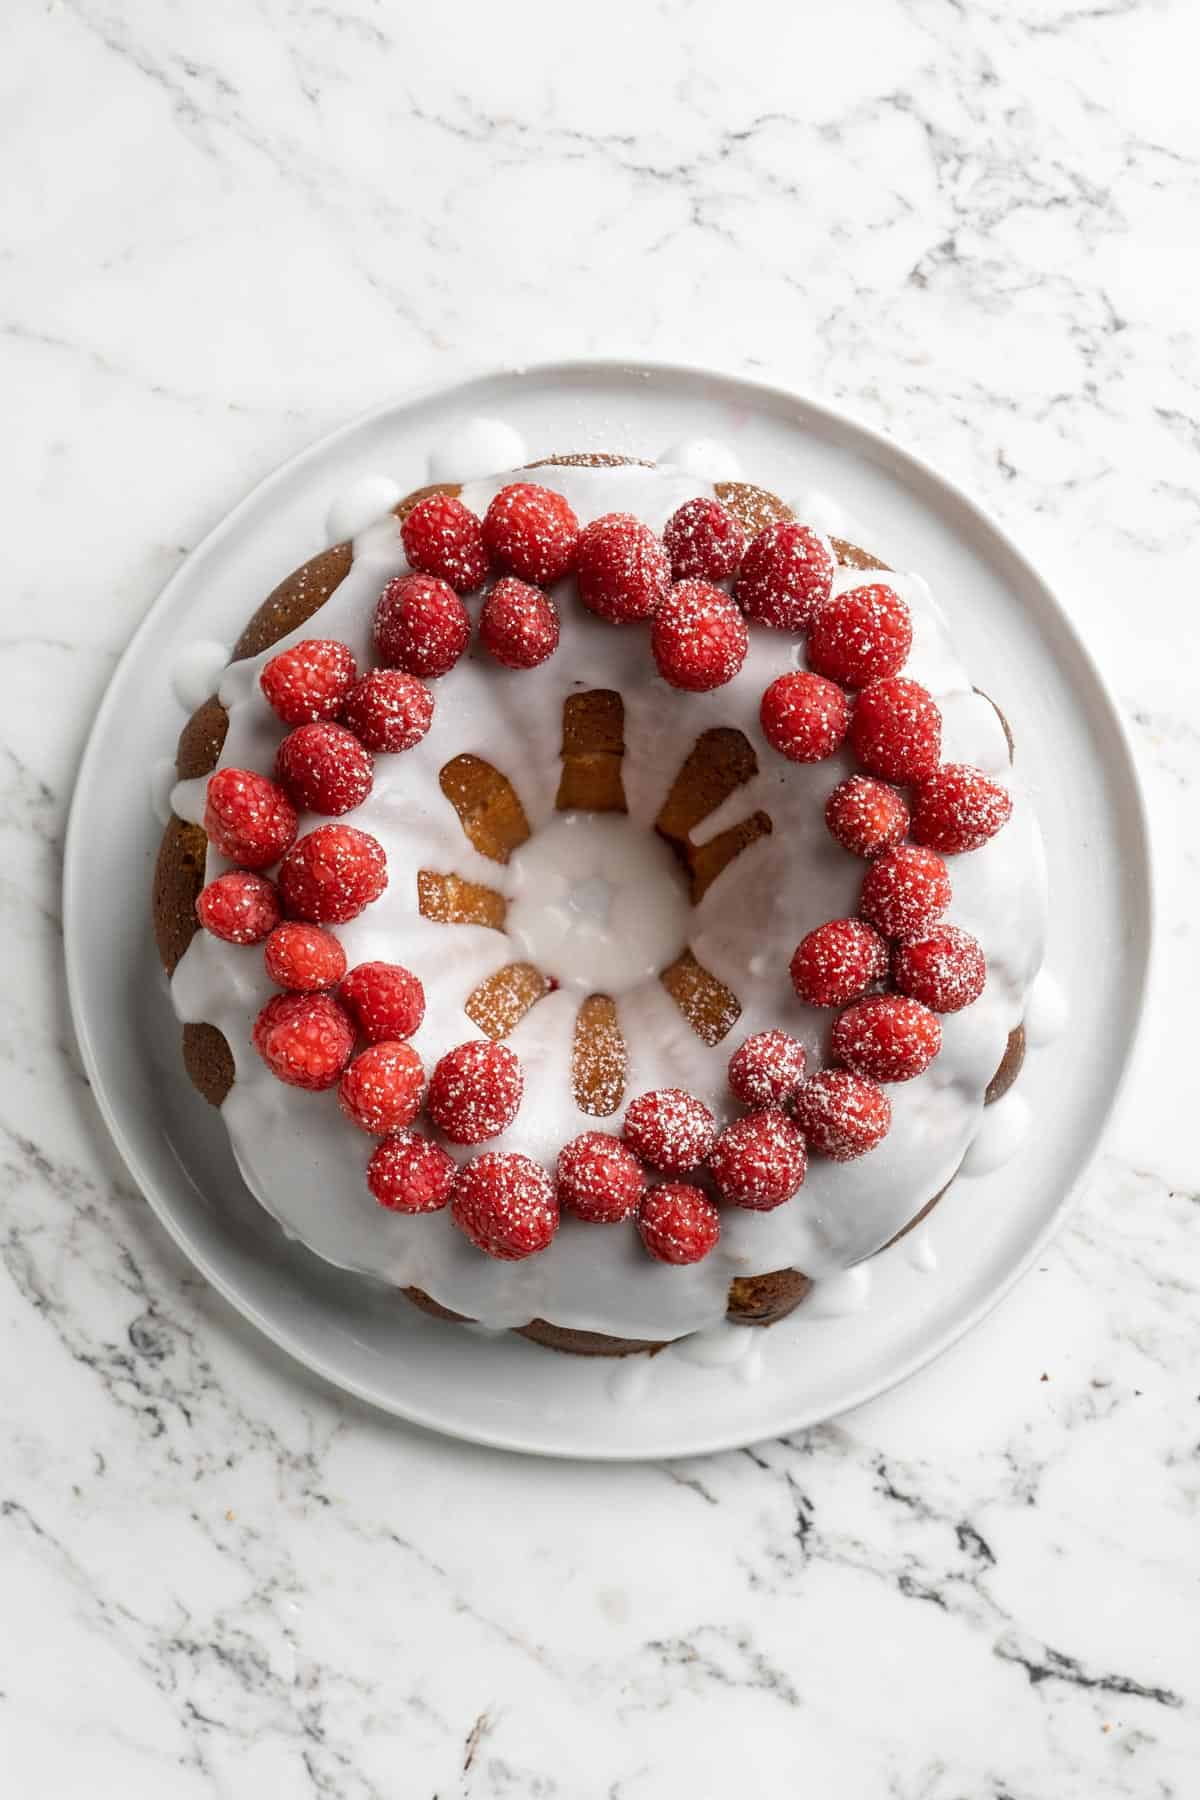 Baked and garnished white chocolate raspberry bundt cake on a white plate